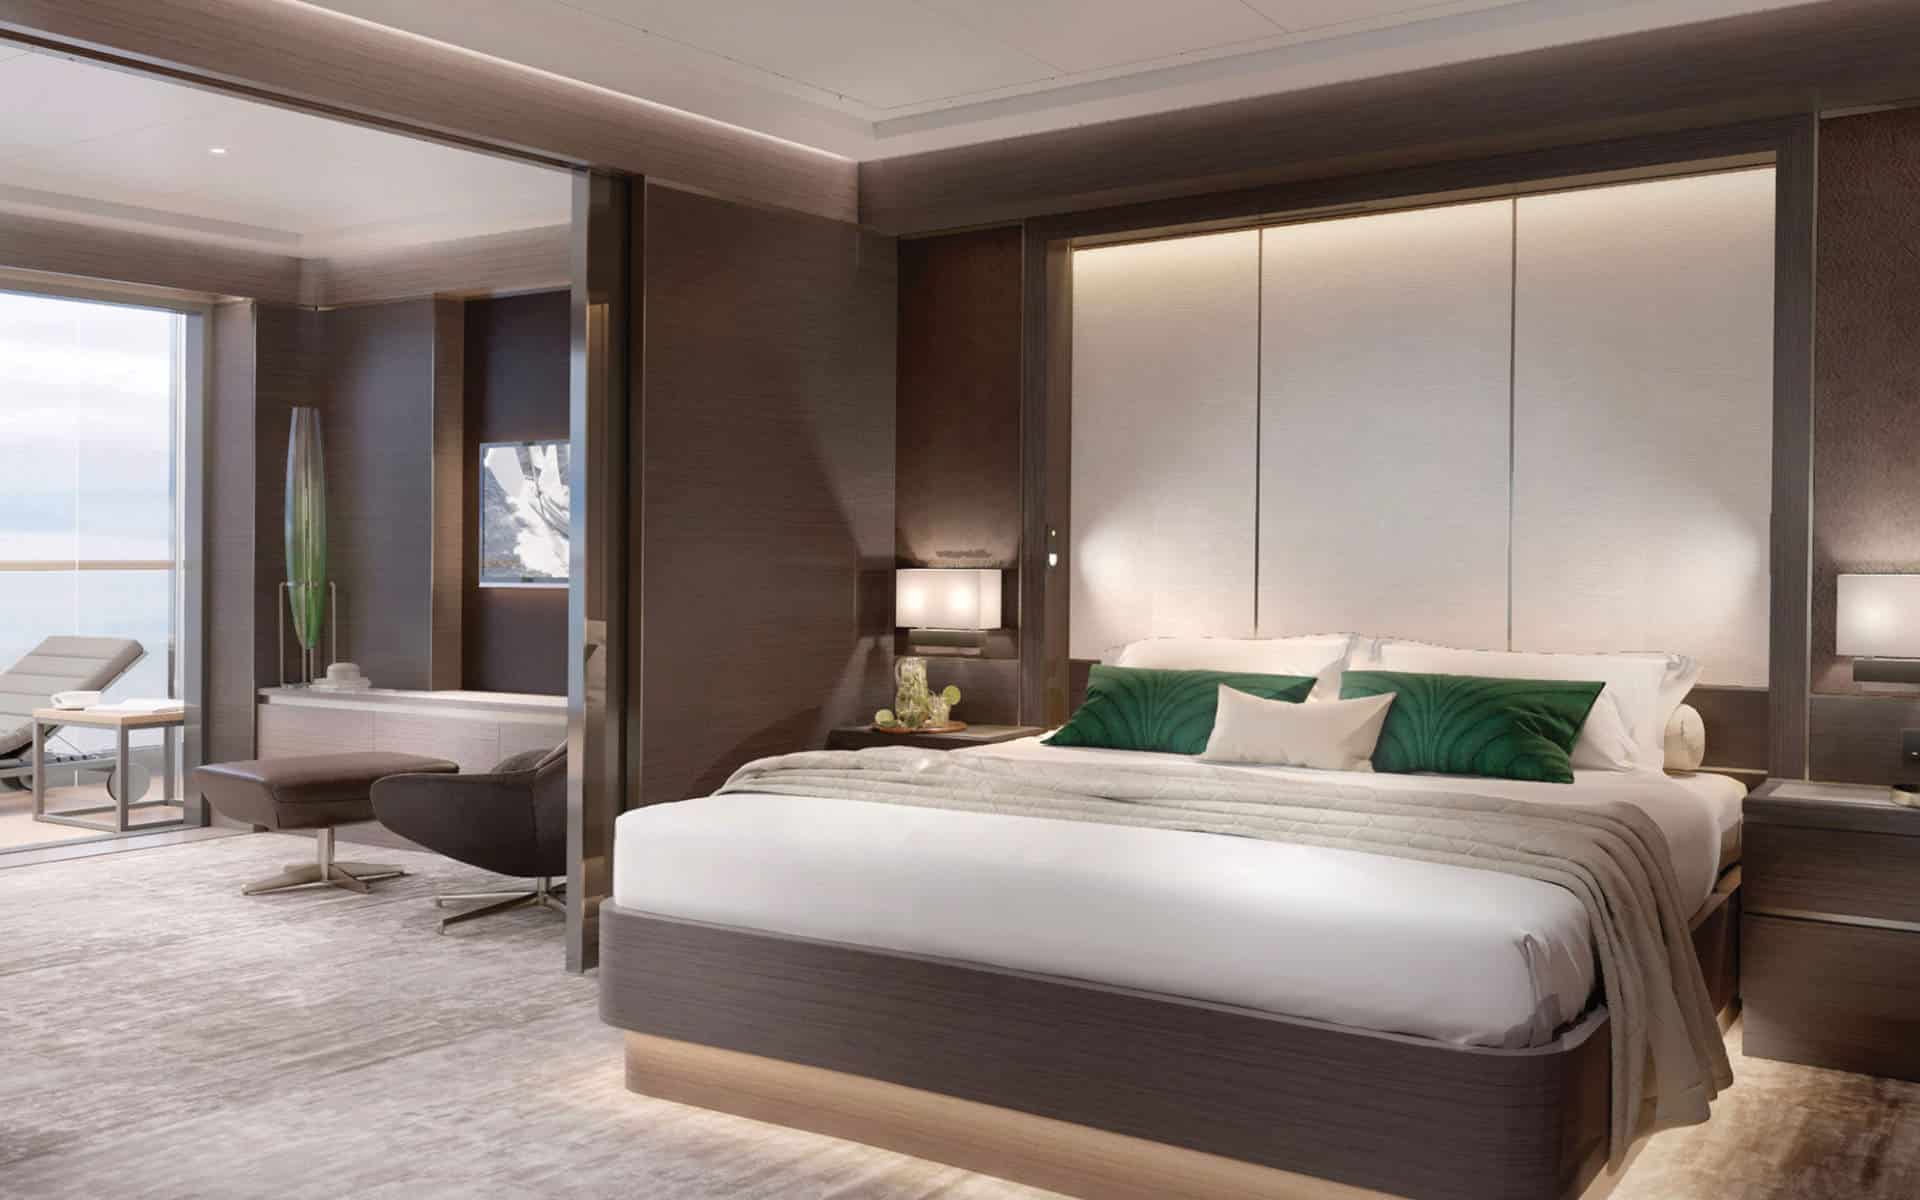 Grand Suite bedroom on The Ritz-Carlton Yacht Collection's Evrima.